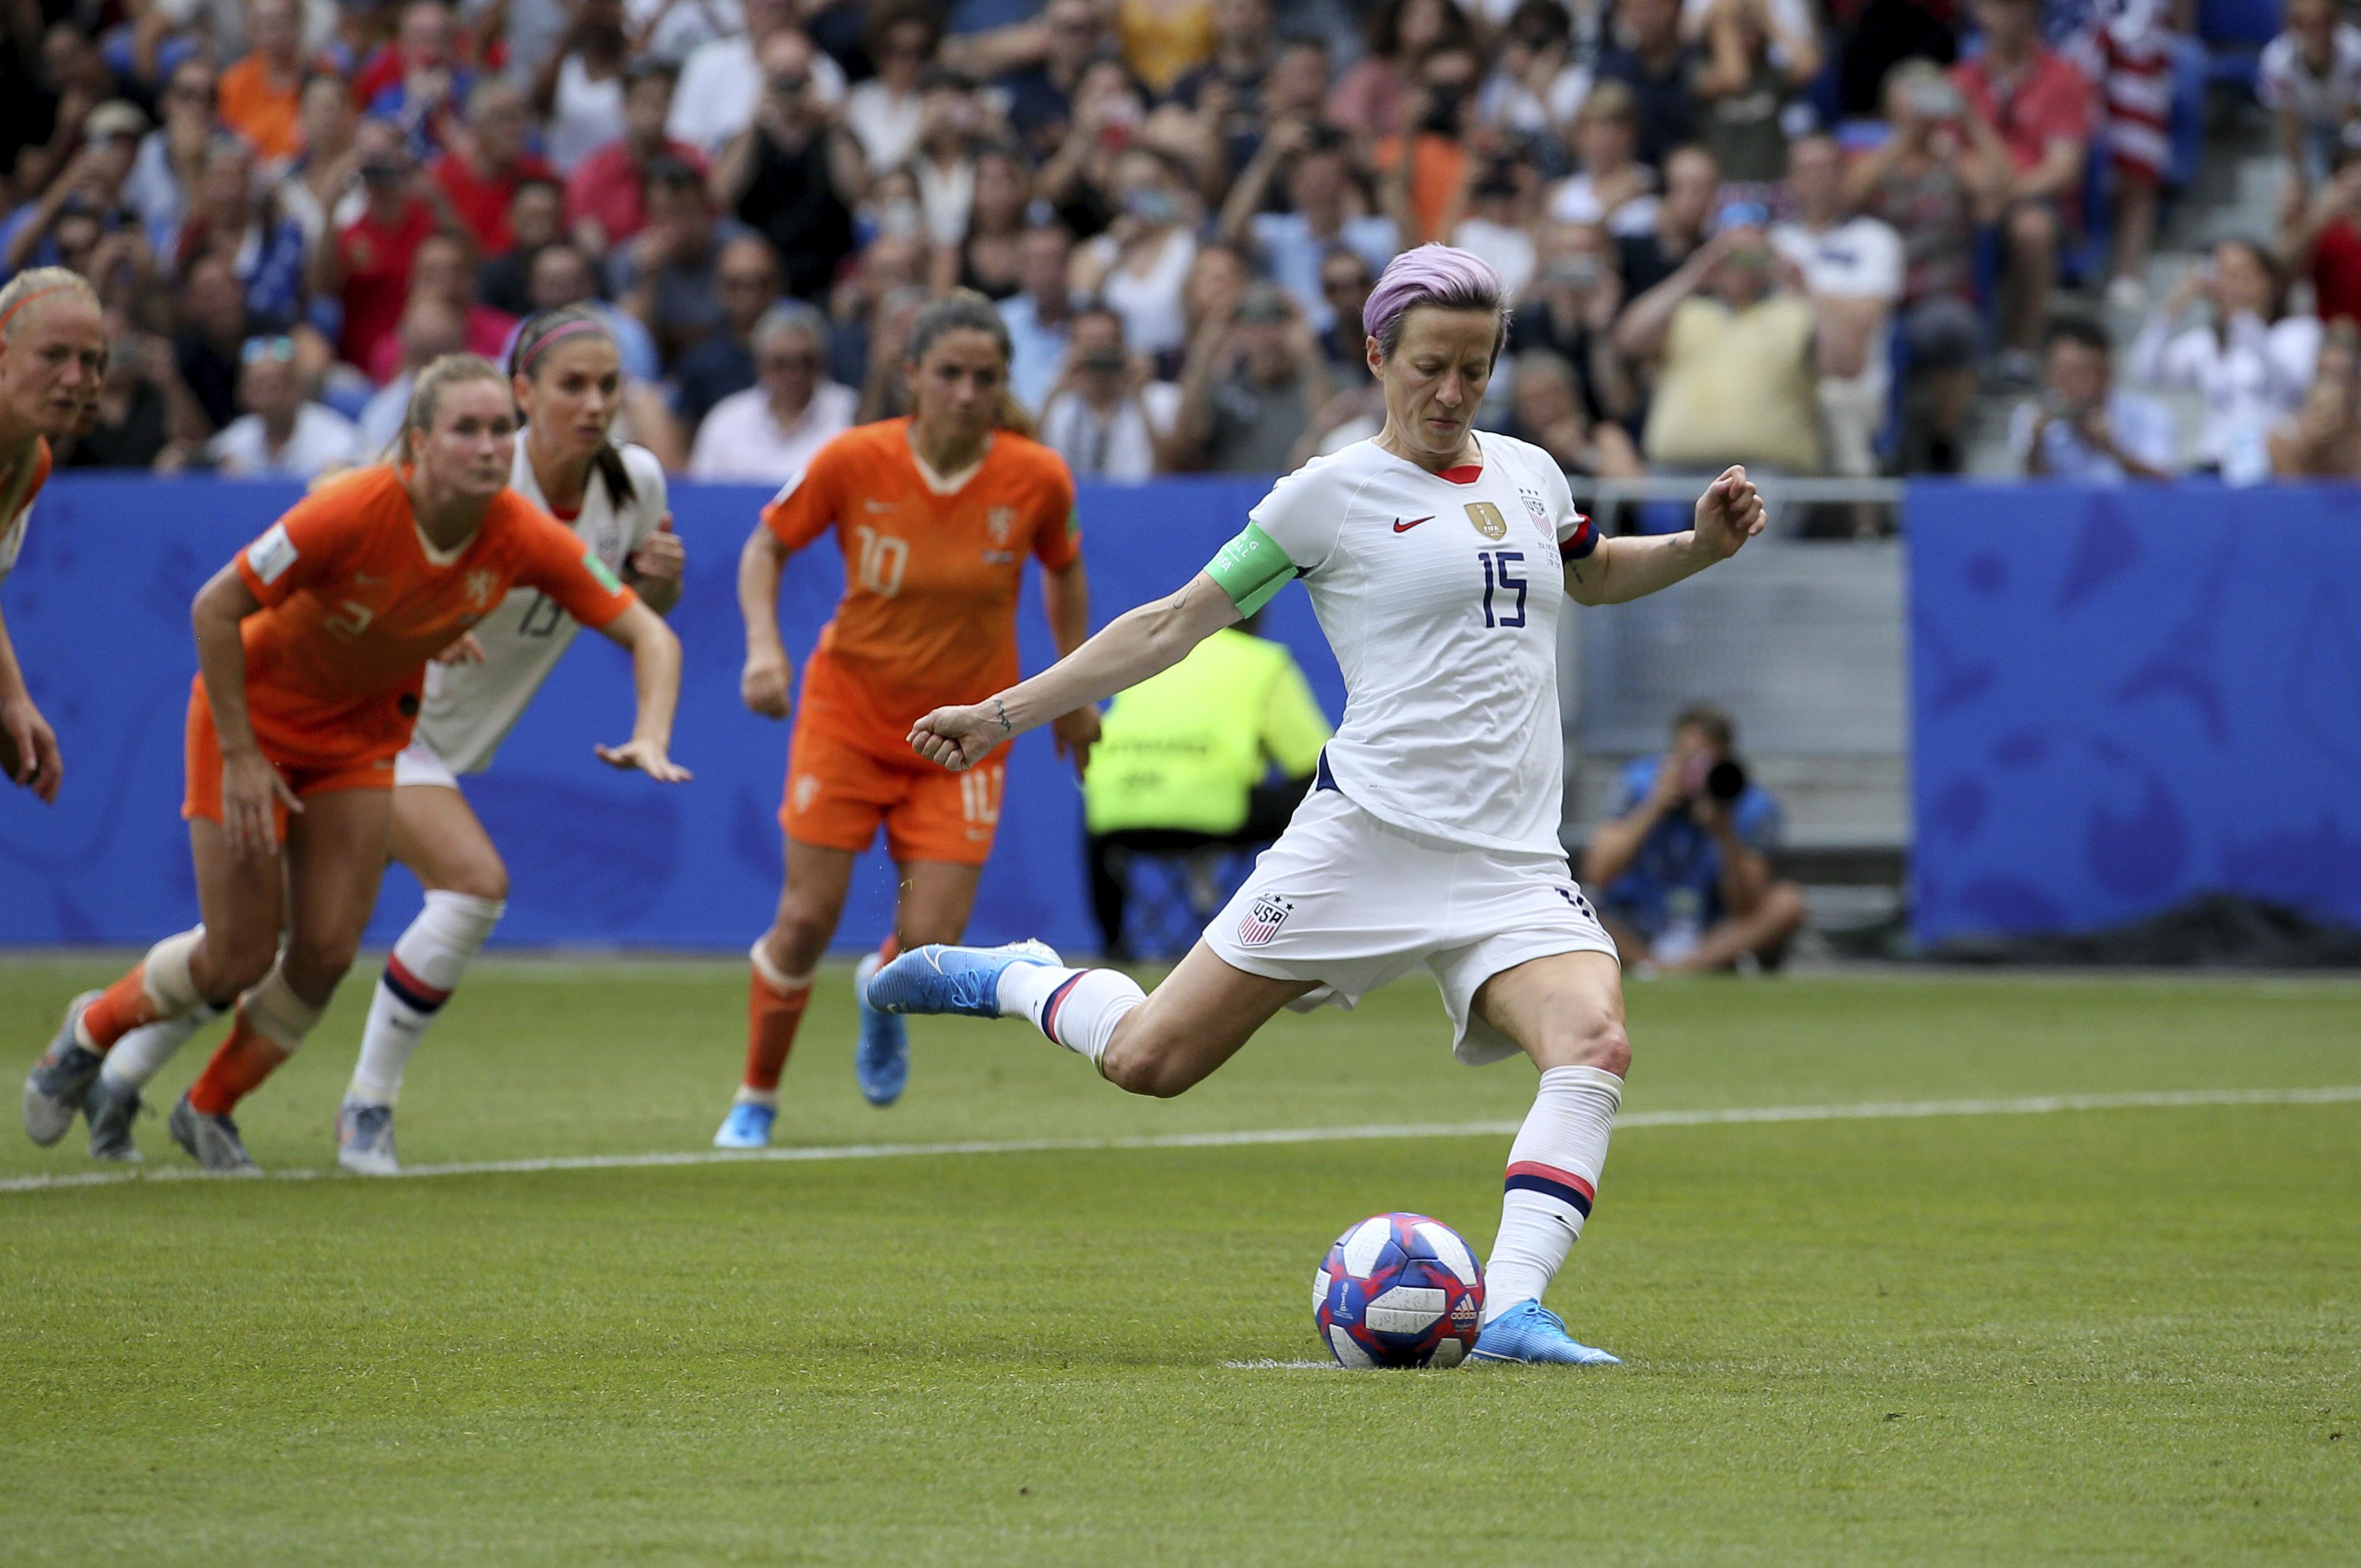 A Grip On Sports The World Cup Win For The Us Women Opened A Sunday